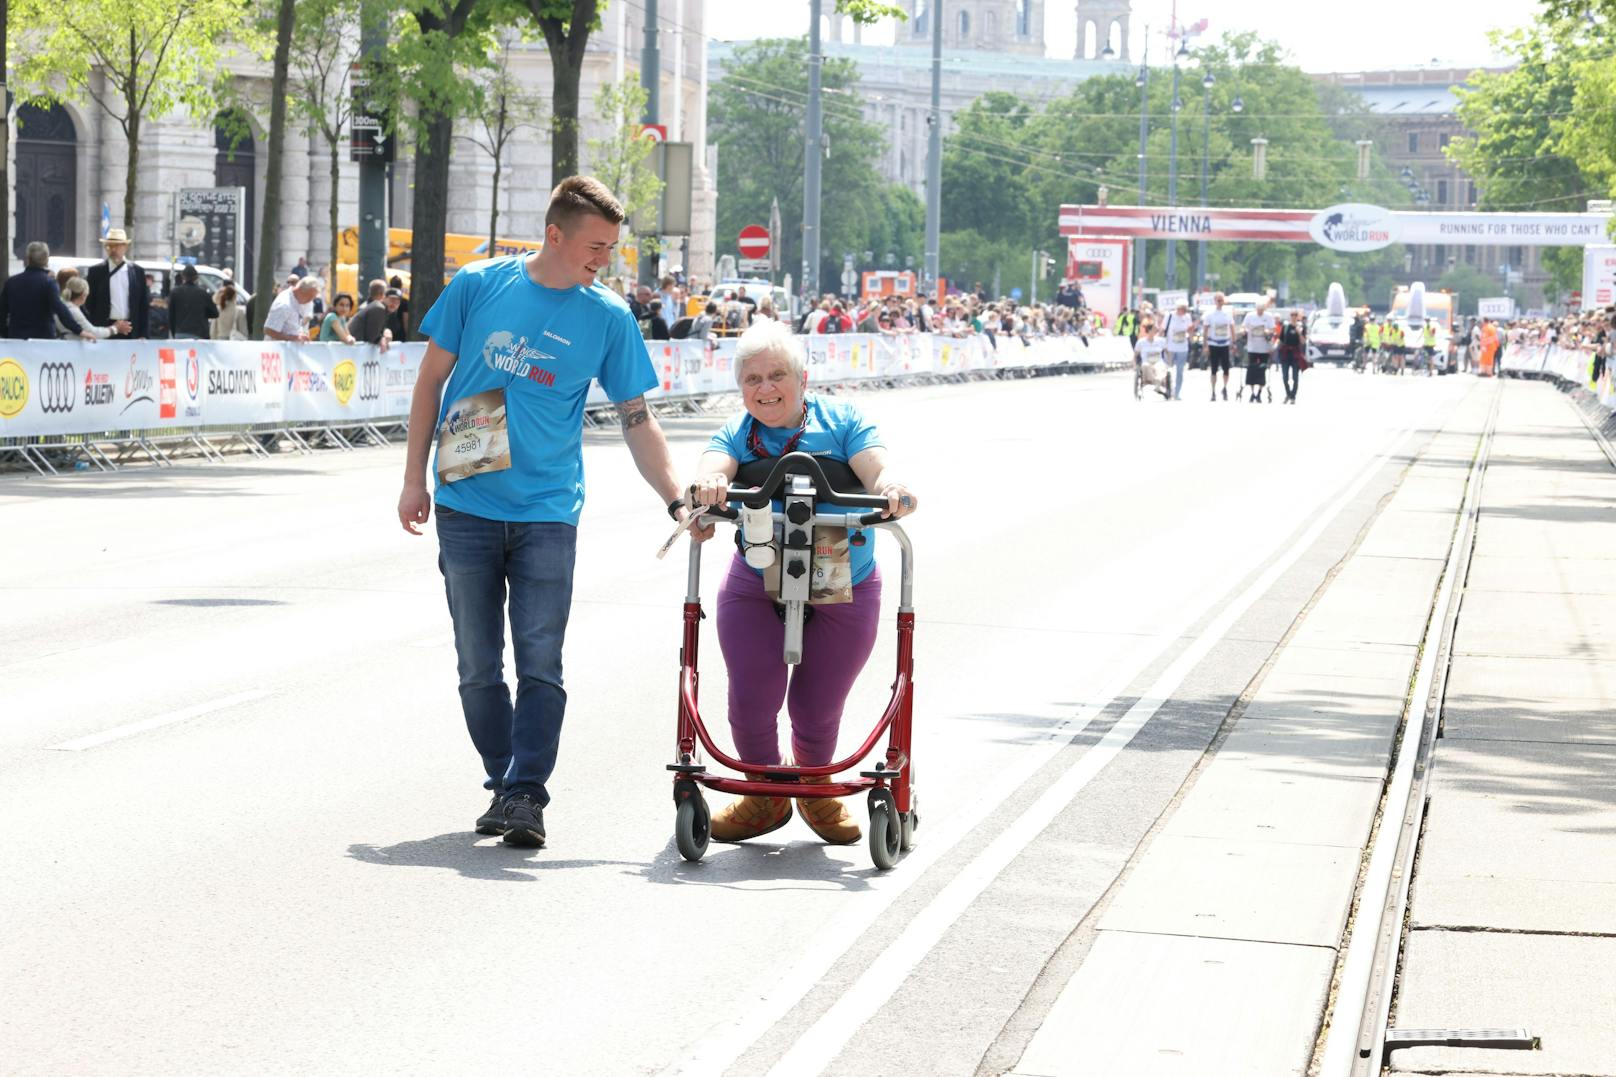 Wings for Life Run – Rosa (65) lief Catcher Car davon